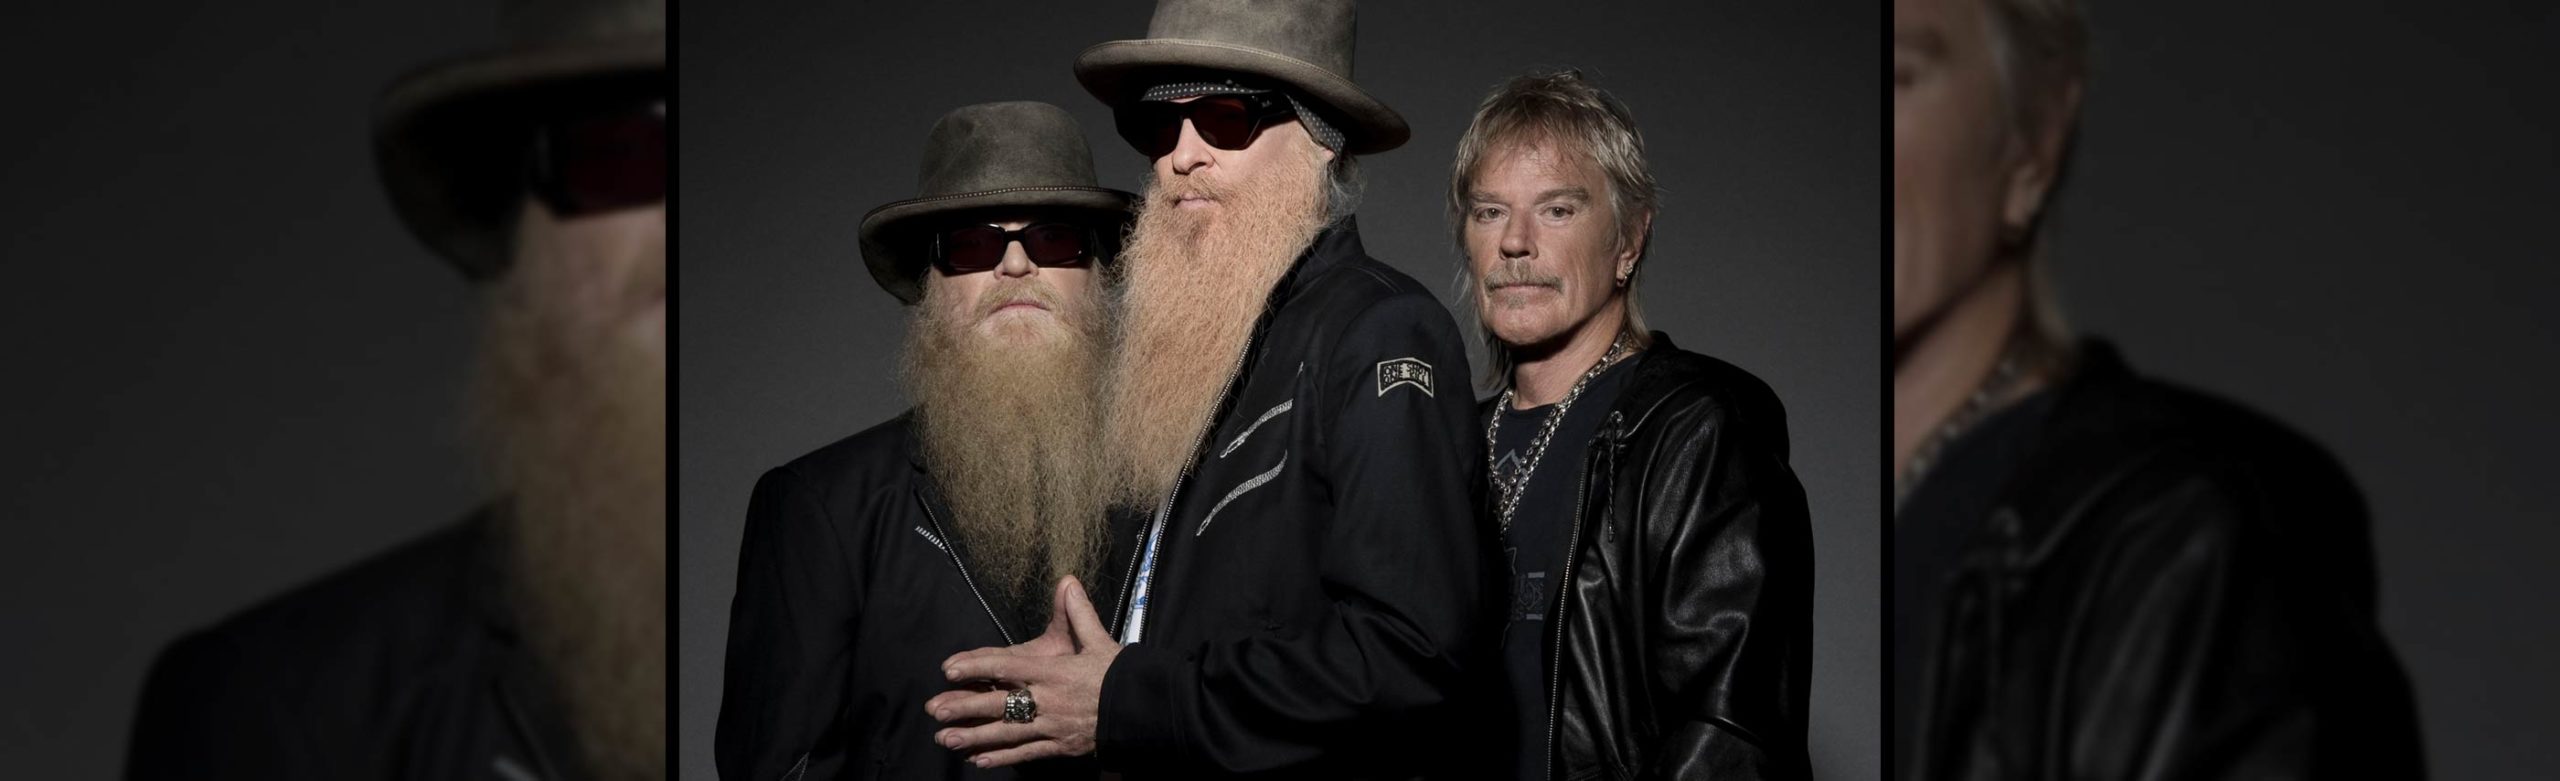 ZZ Top to Rock the KettleHouse Amphitheater Image